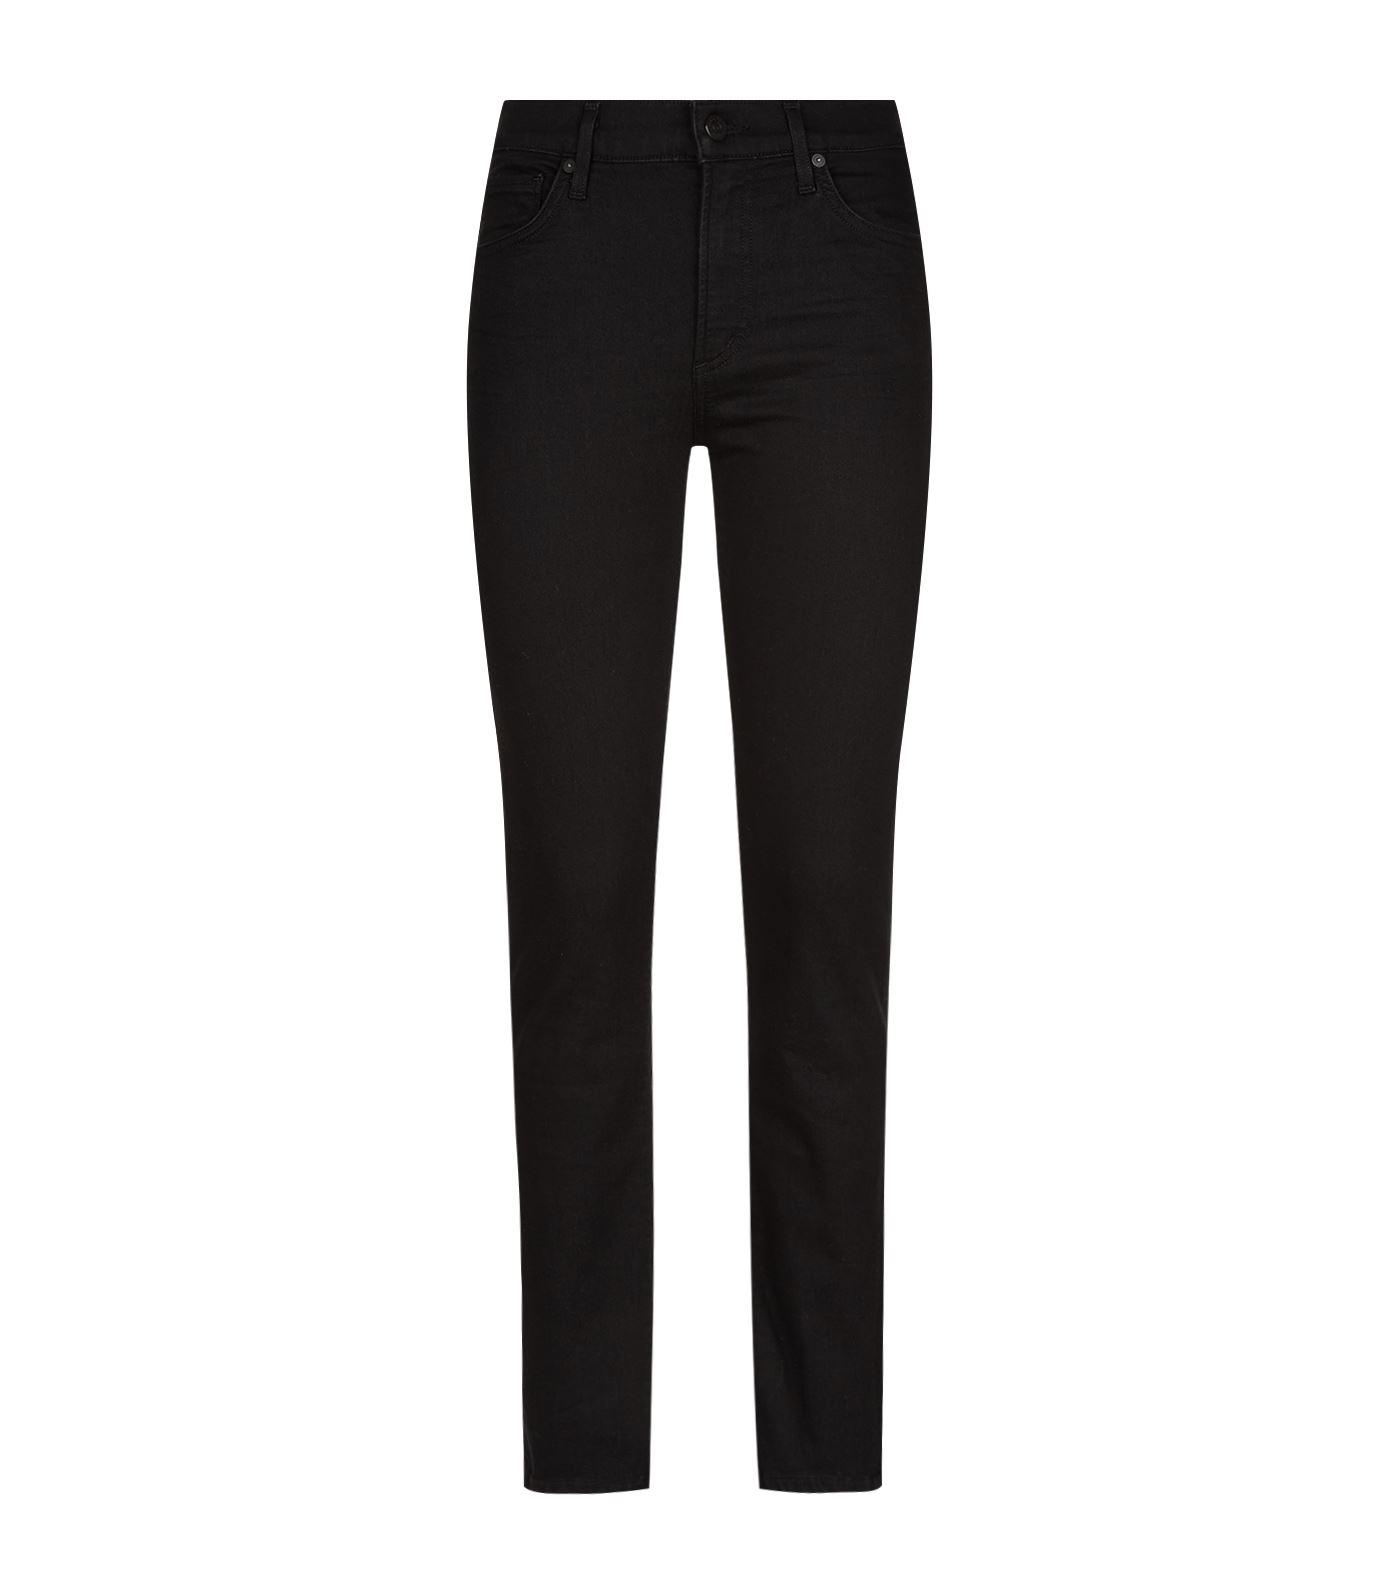 citizens of humanity agnes slim straight jeans